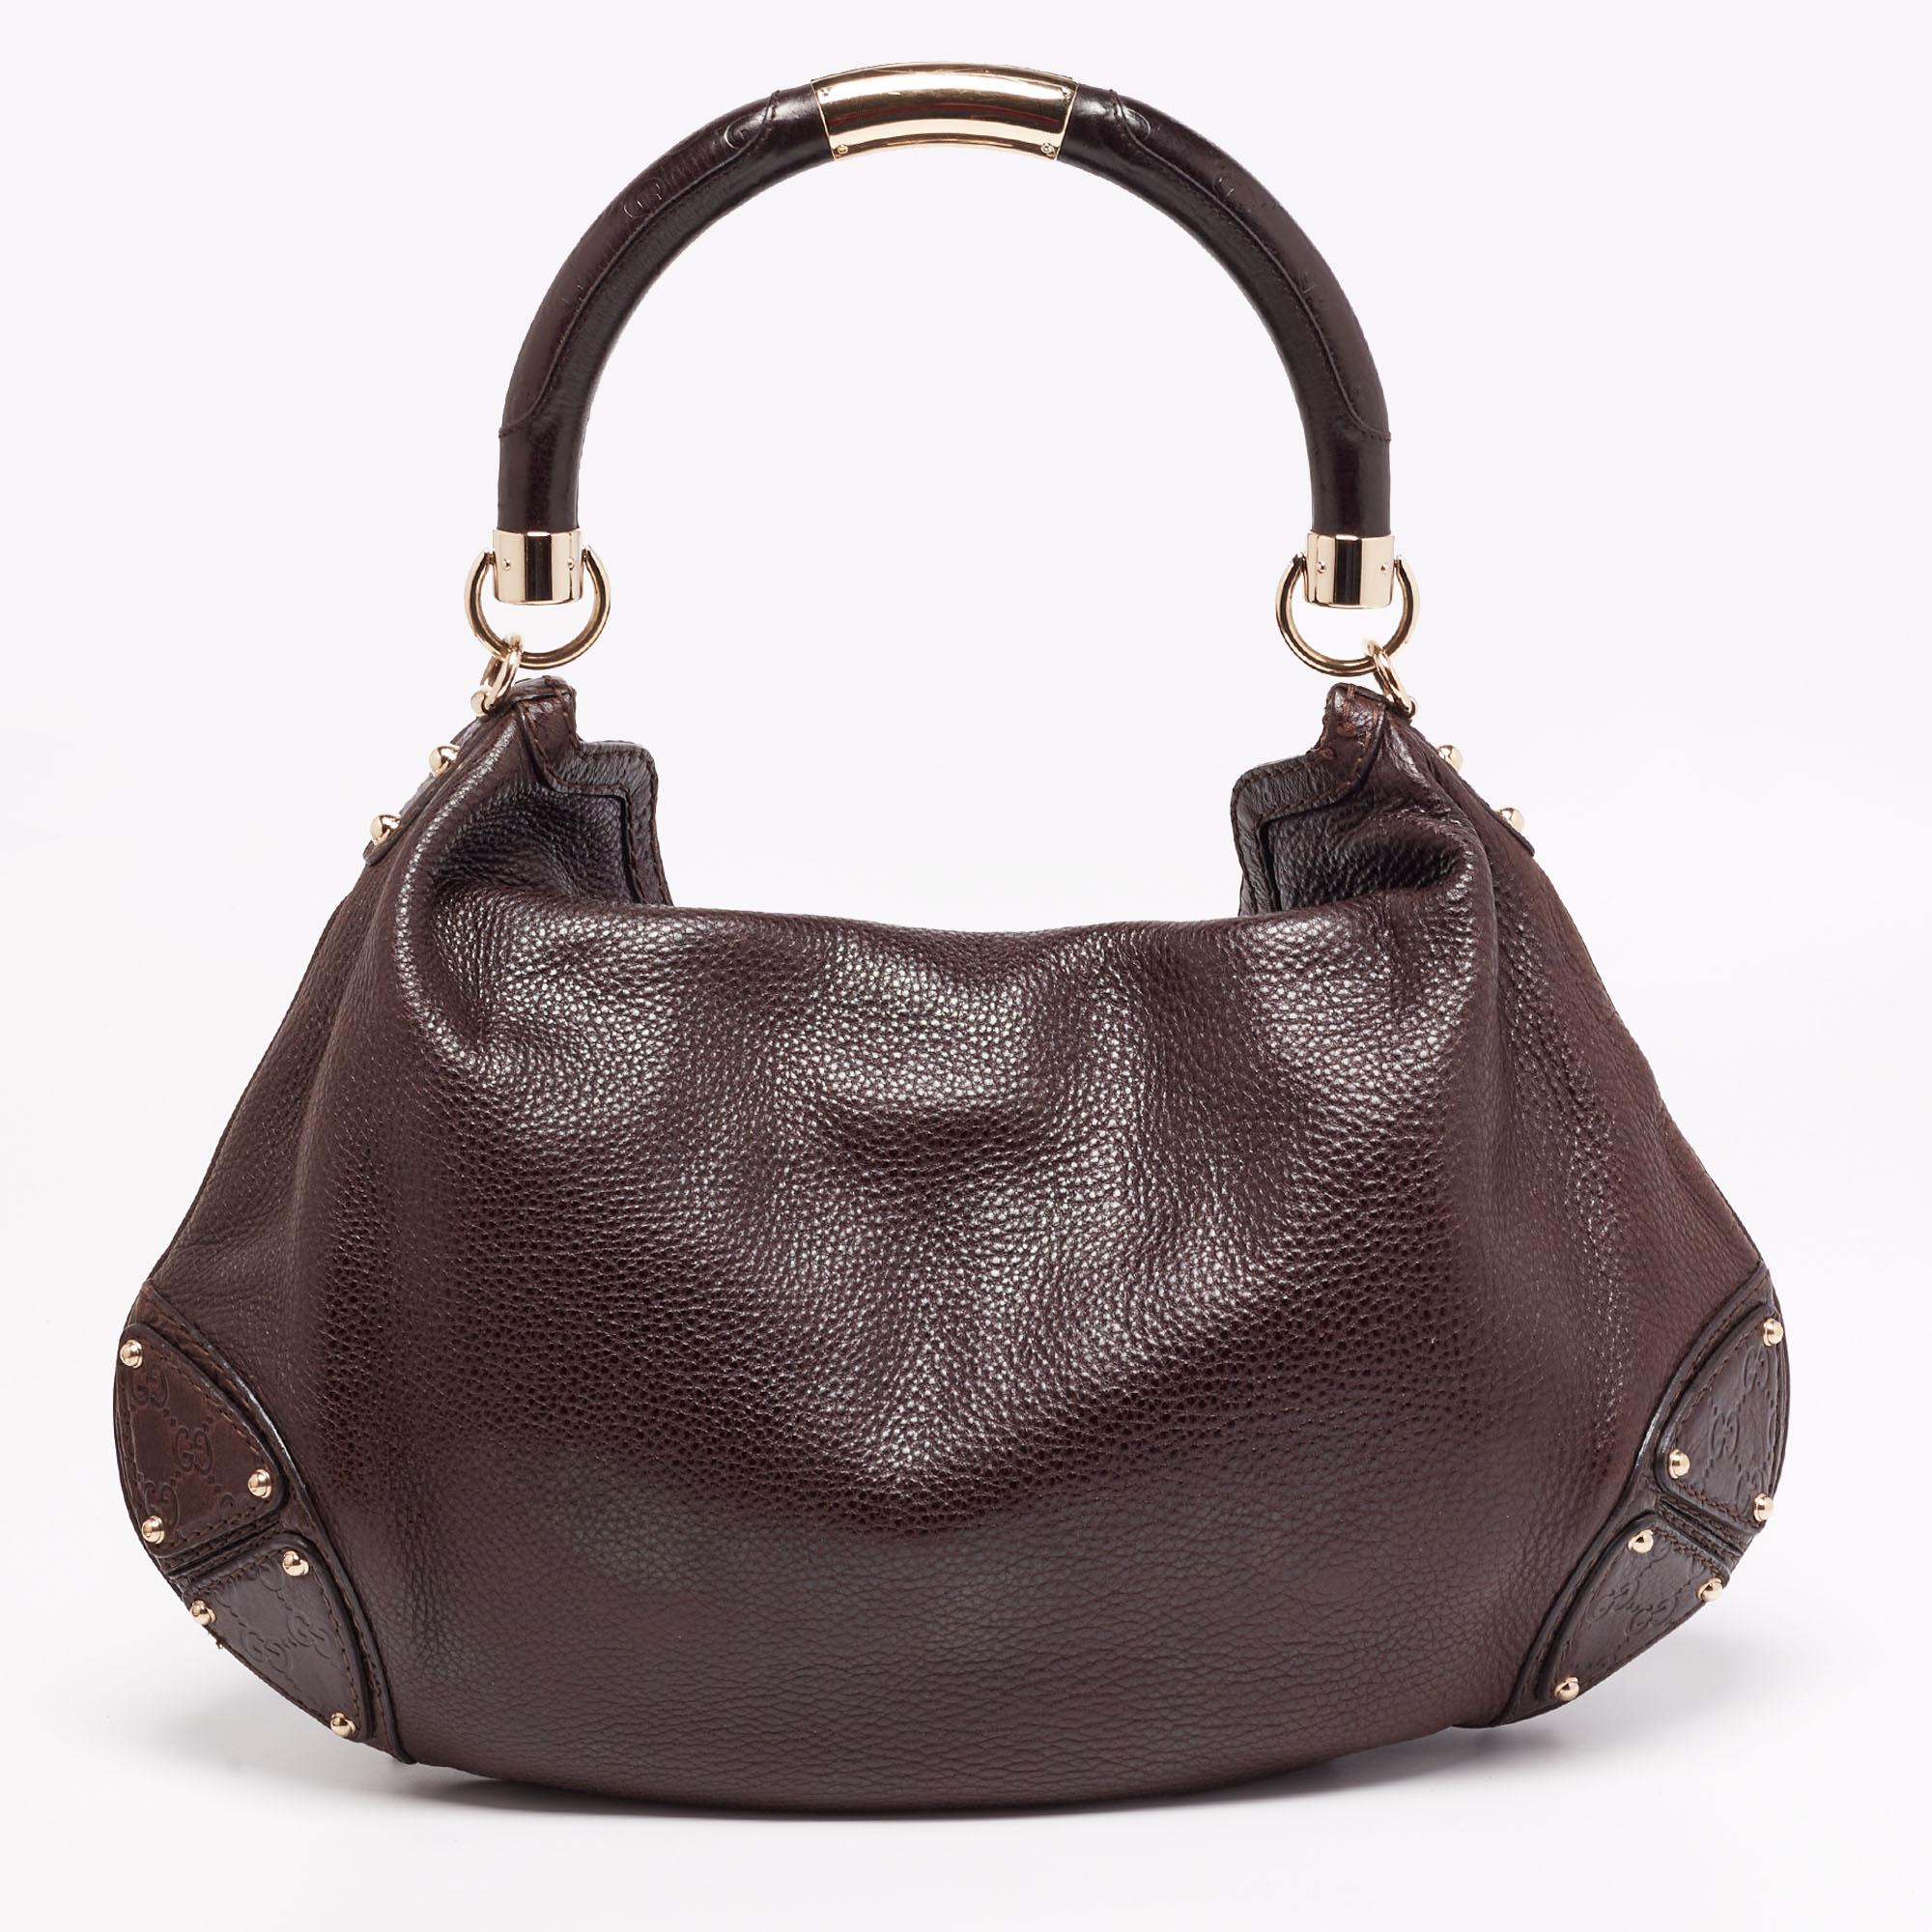 The Gucci Babouska Indy is a modern everyday bag with a chic Bohemian finish. This dark brown bag is made of leather that is adorned with double tassels having Bamboo details. It is finished with studs, an engraved top handle, and a shoulder strap.